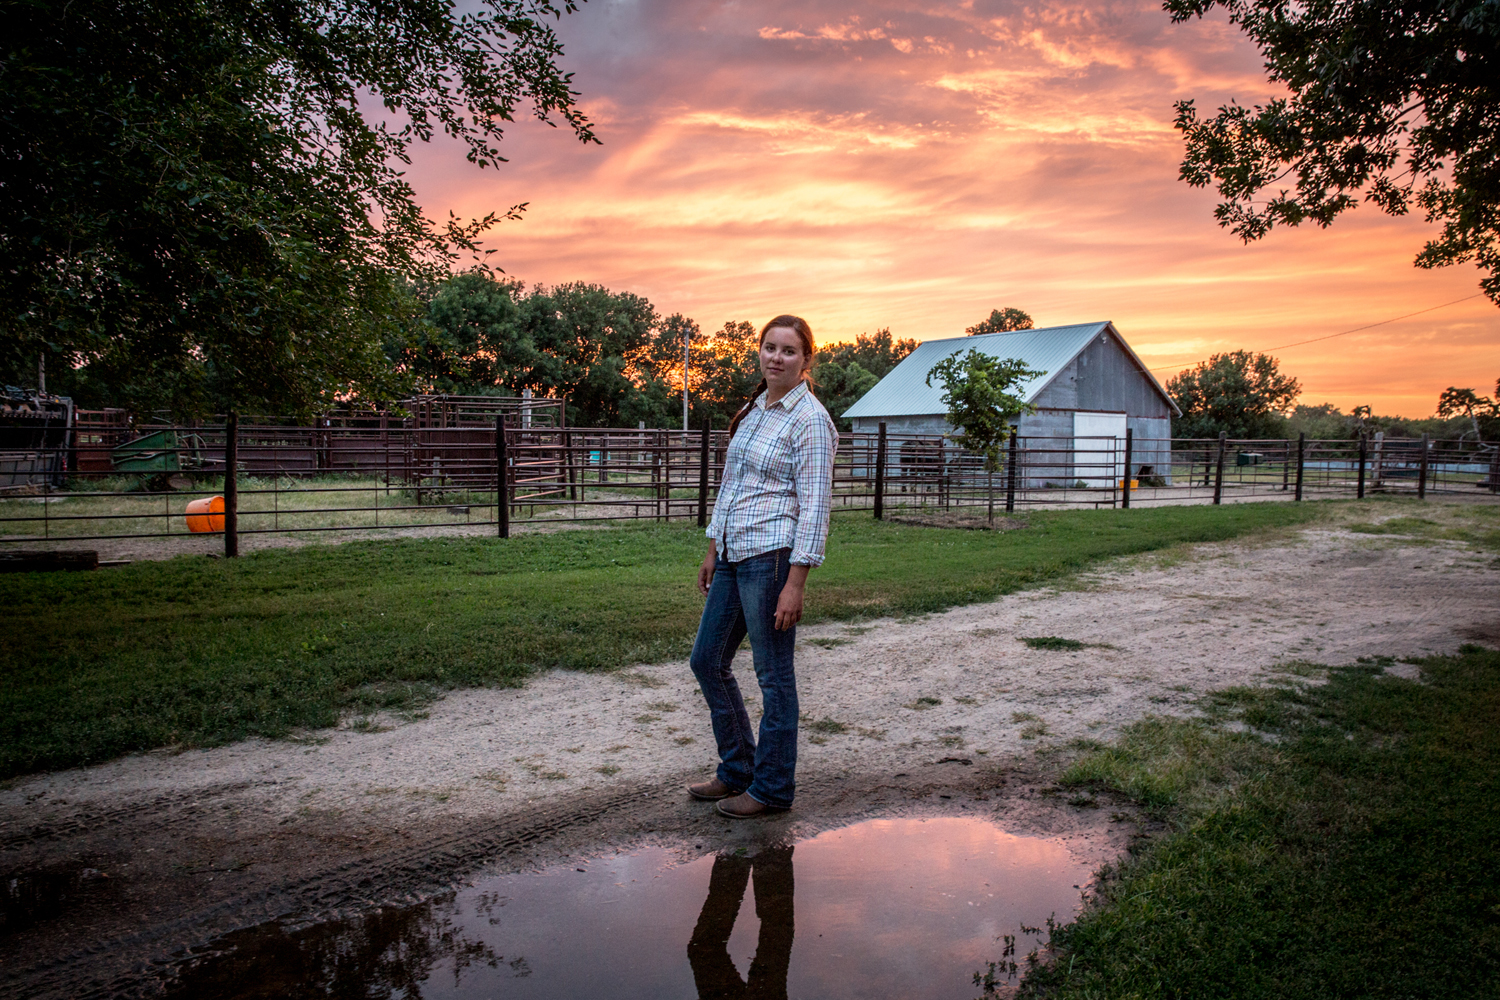 After completing her nightly chores, Meghan Hammond pauses briefly under a brilliant July sunset before heading back home to her farm in Lushton, Nebraska. (Ted Genoways)